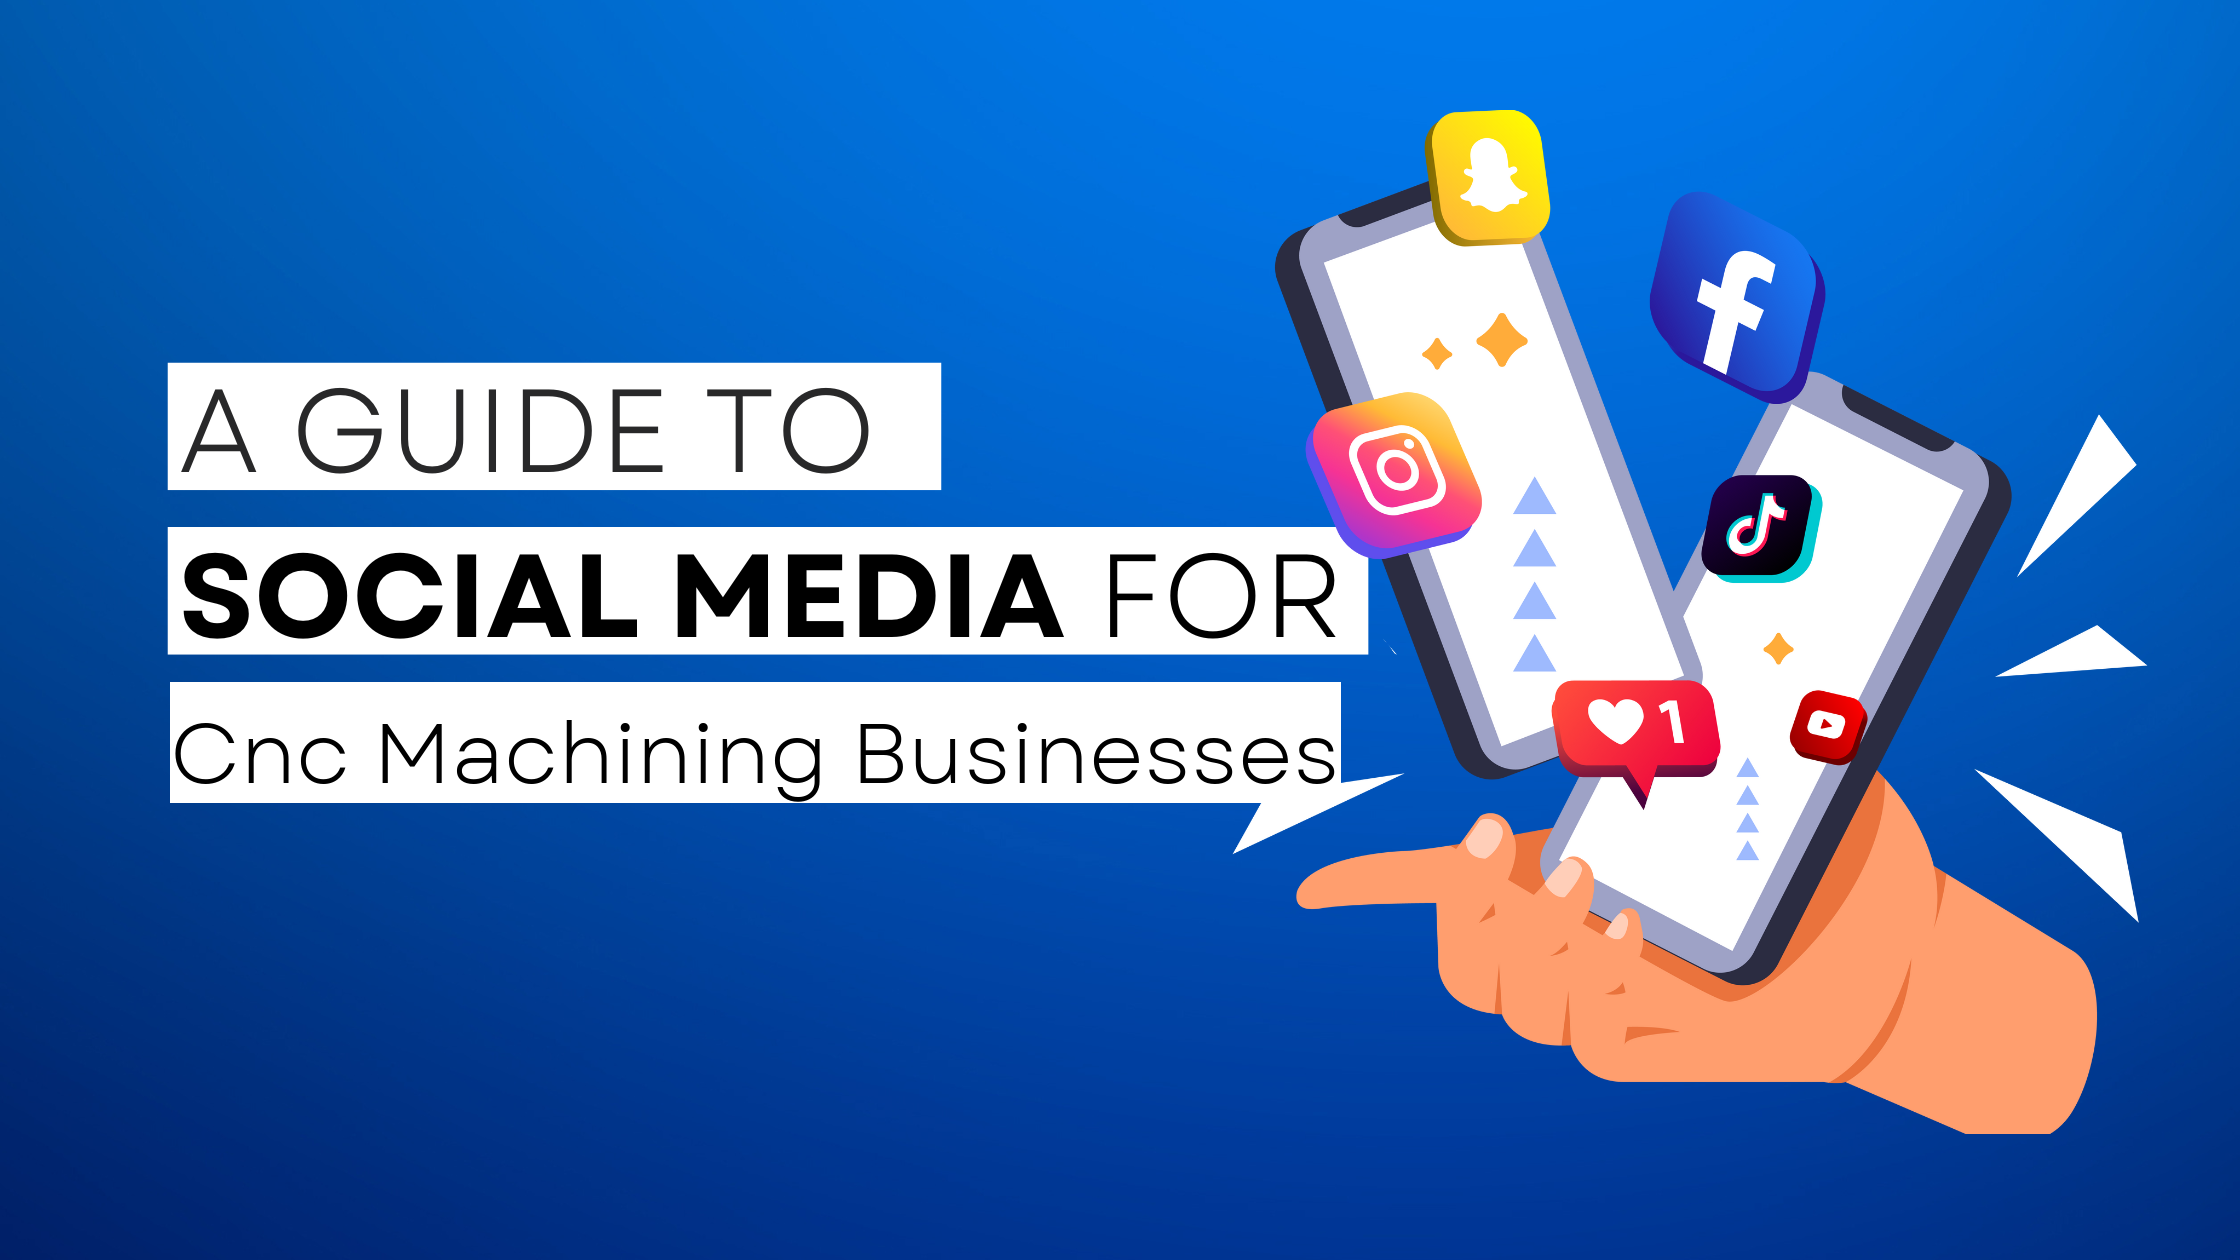 How to start Cnc Machining on social media